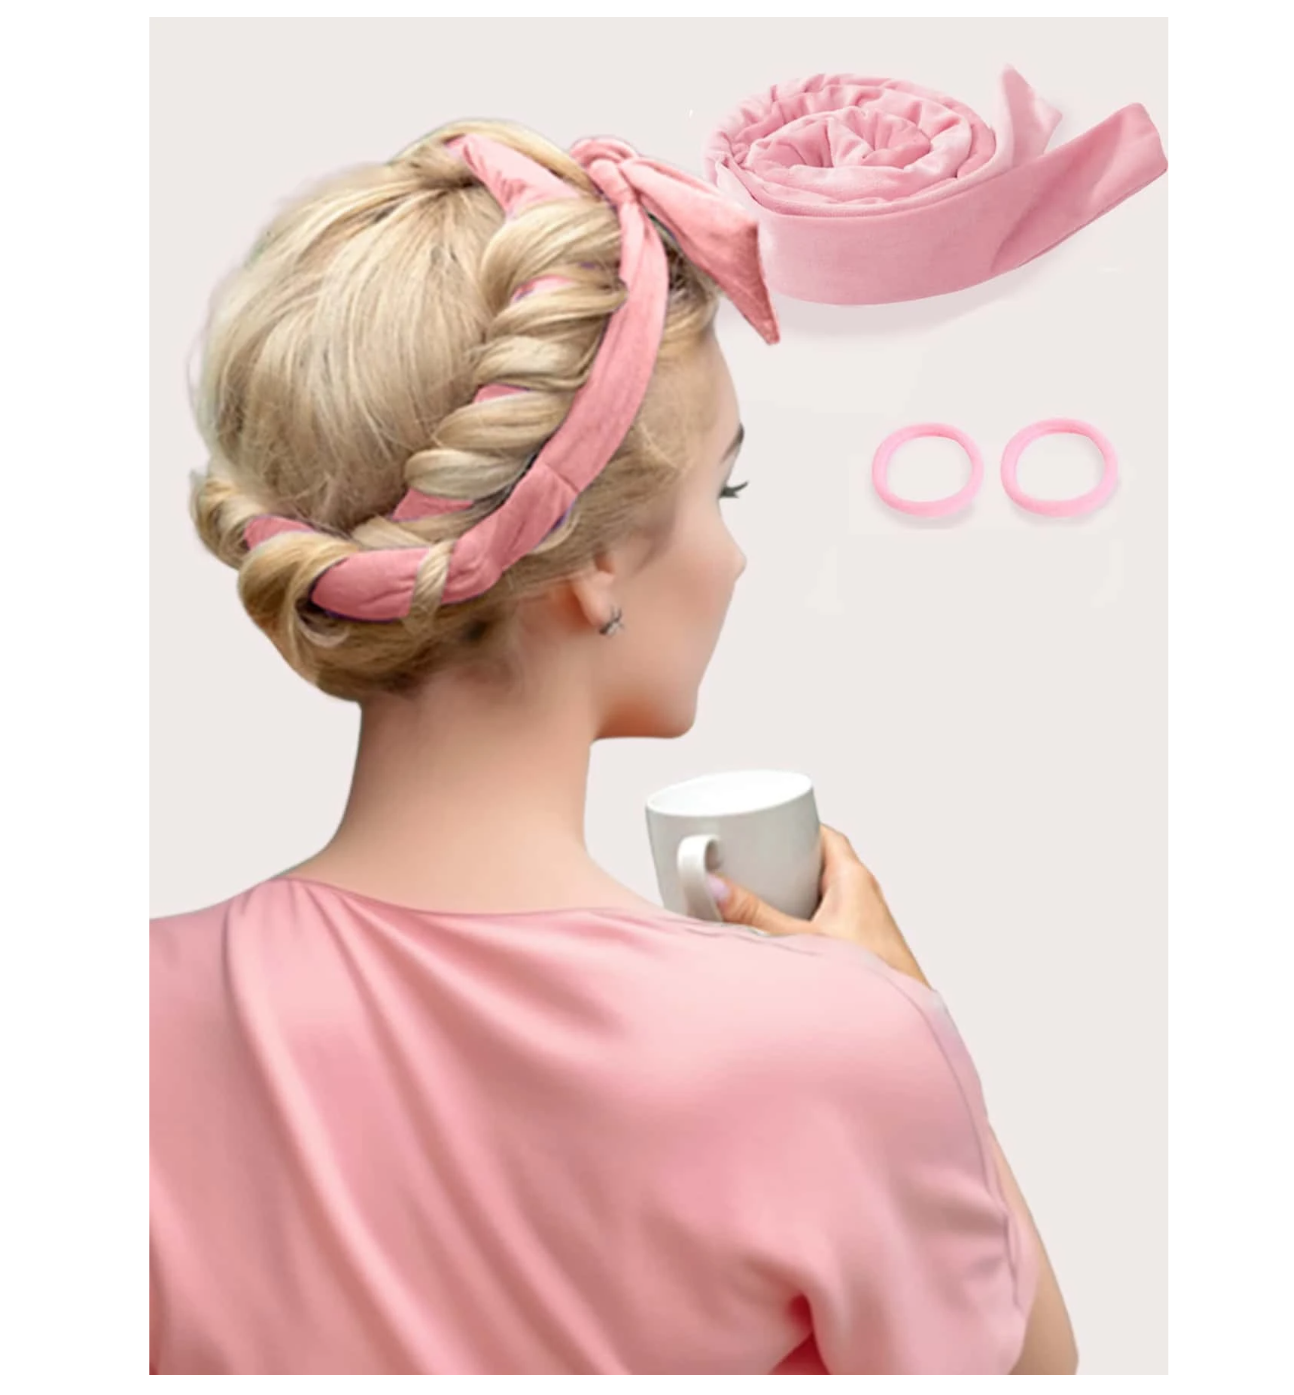 Dreamy Waves Sans the Heat: Black Friday Special on Heatless Curling Rod Headband – Unleash Your Natural Soft Wave with Sleeping Curls Ribbon Rollers!